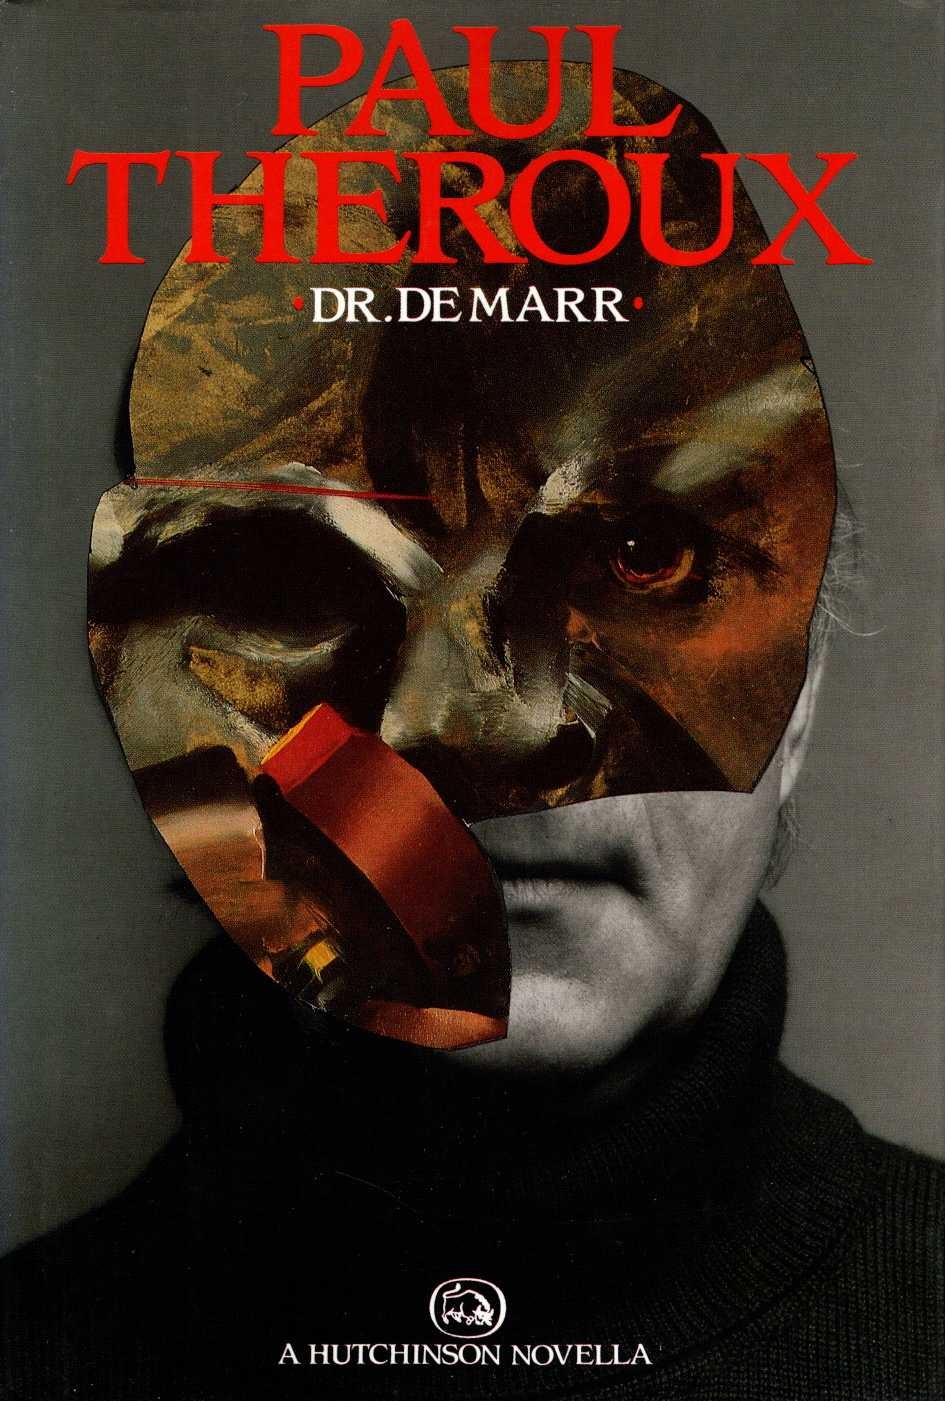 Dr.DeMARR front book cover image